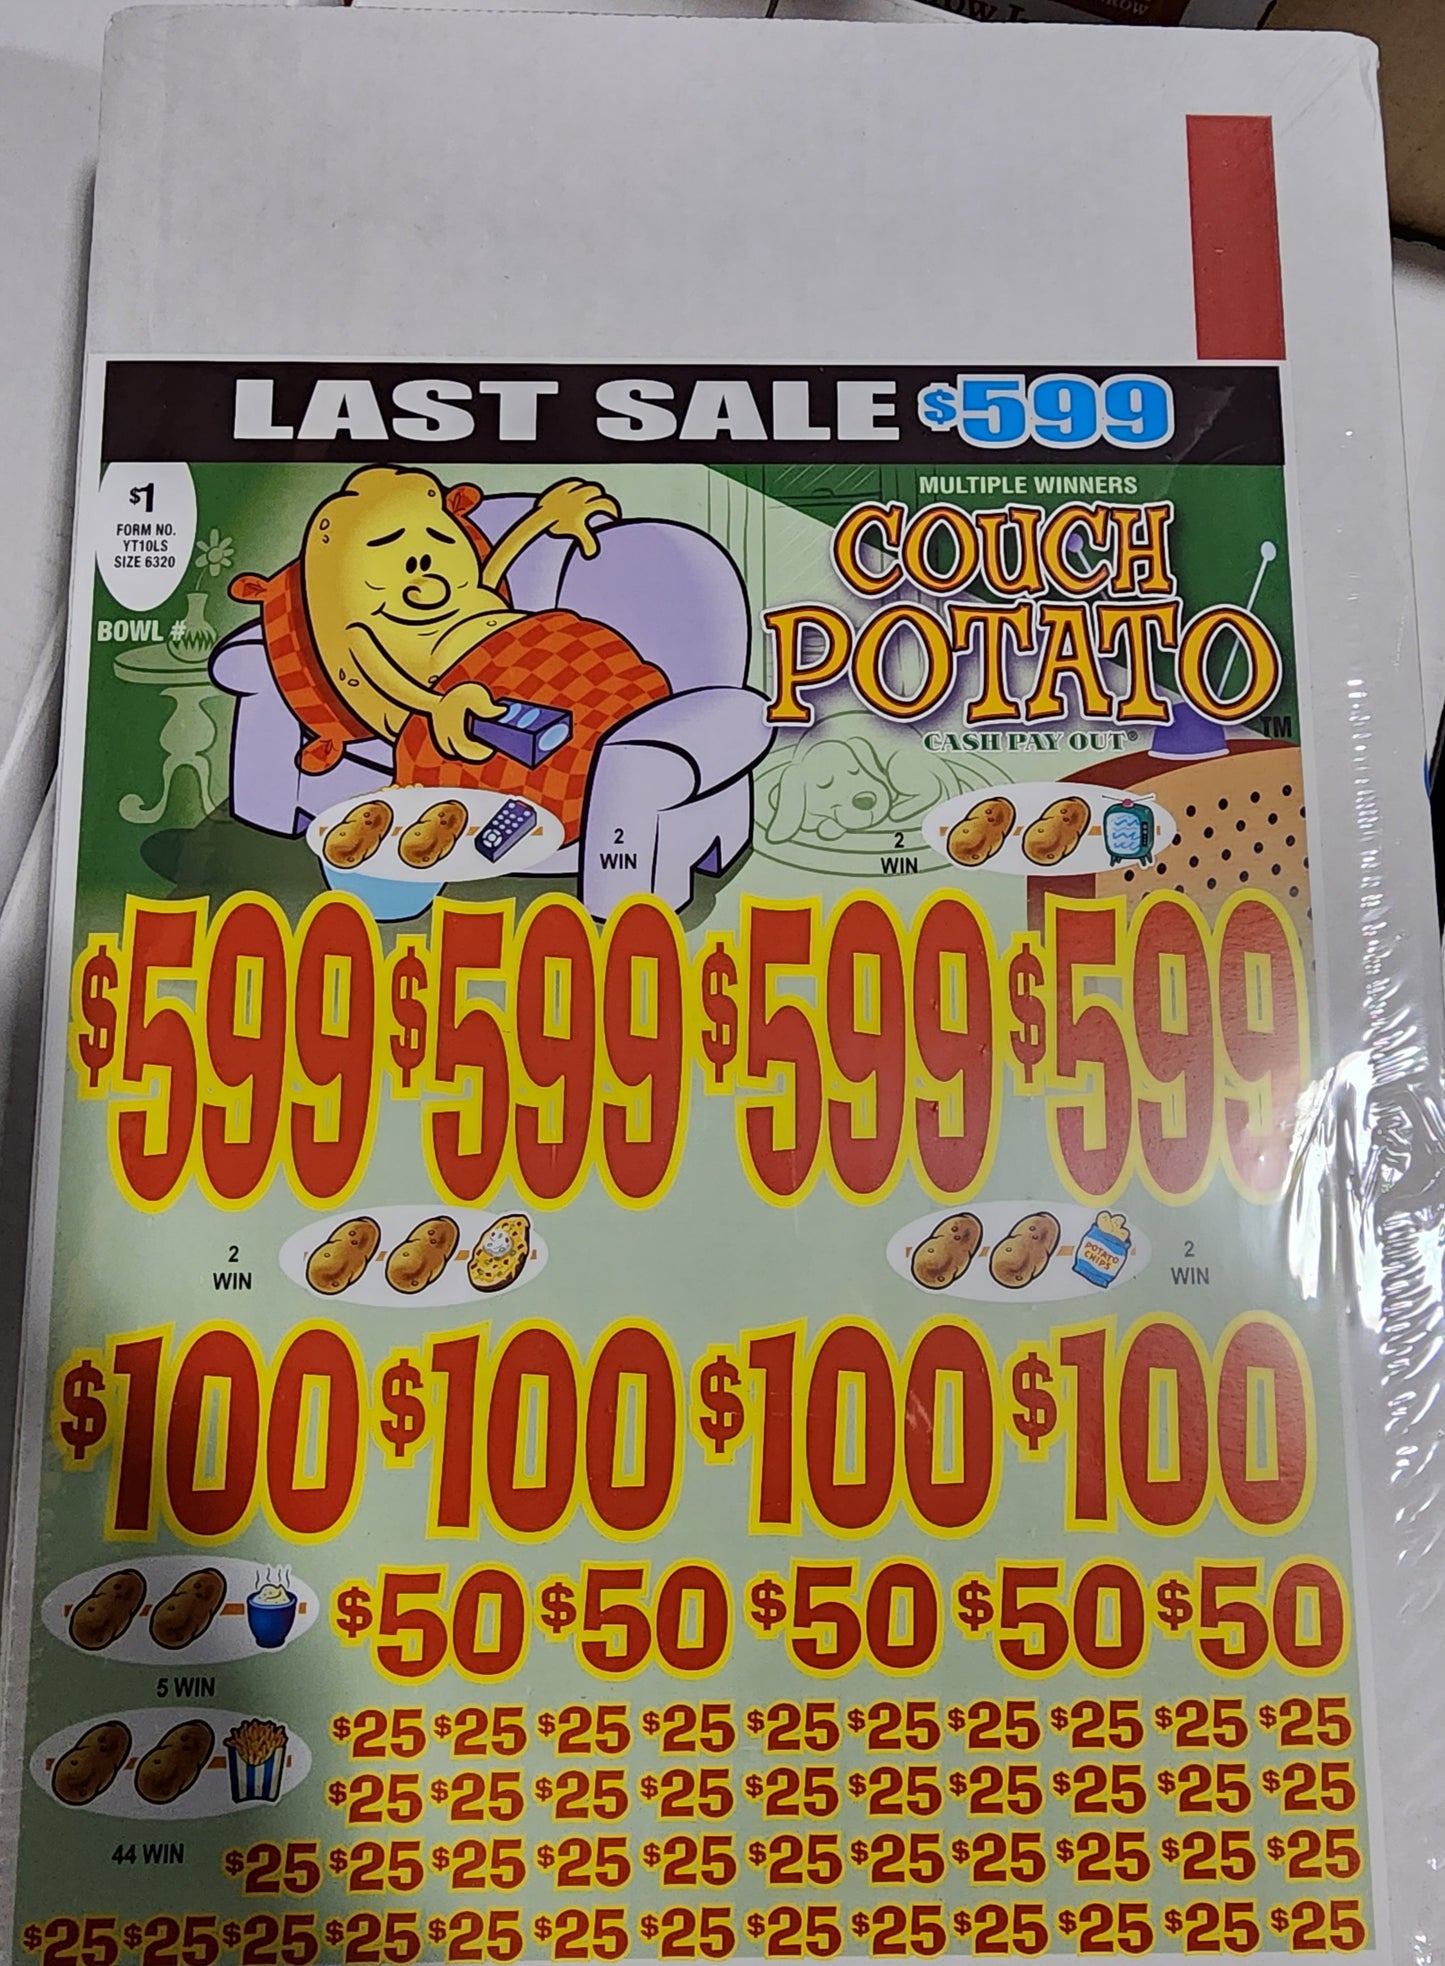 COUCH POTATO WITH LAST SALE